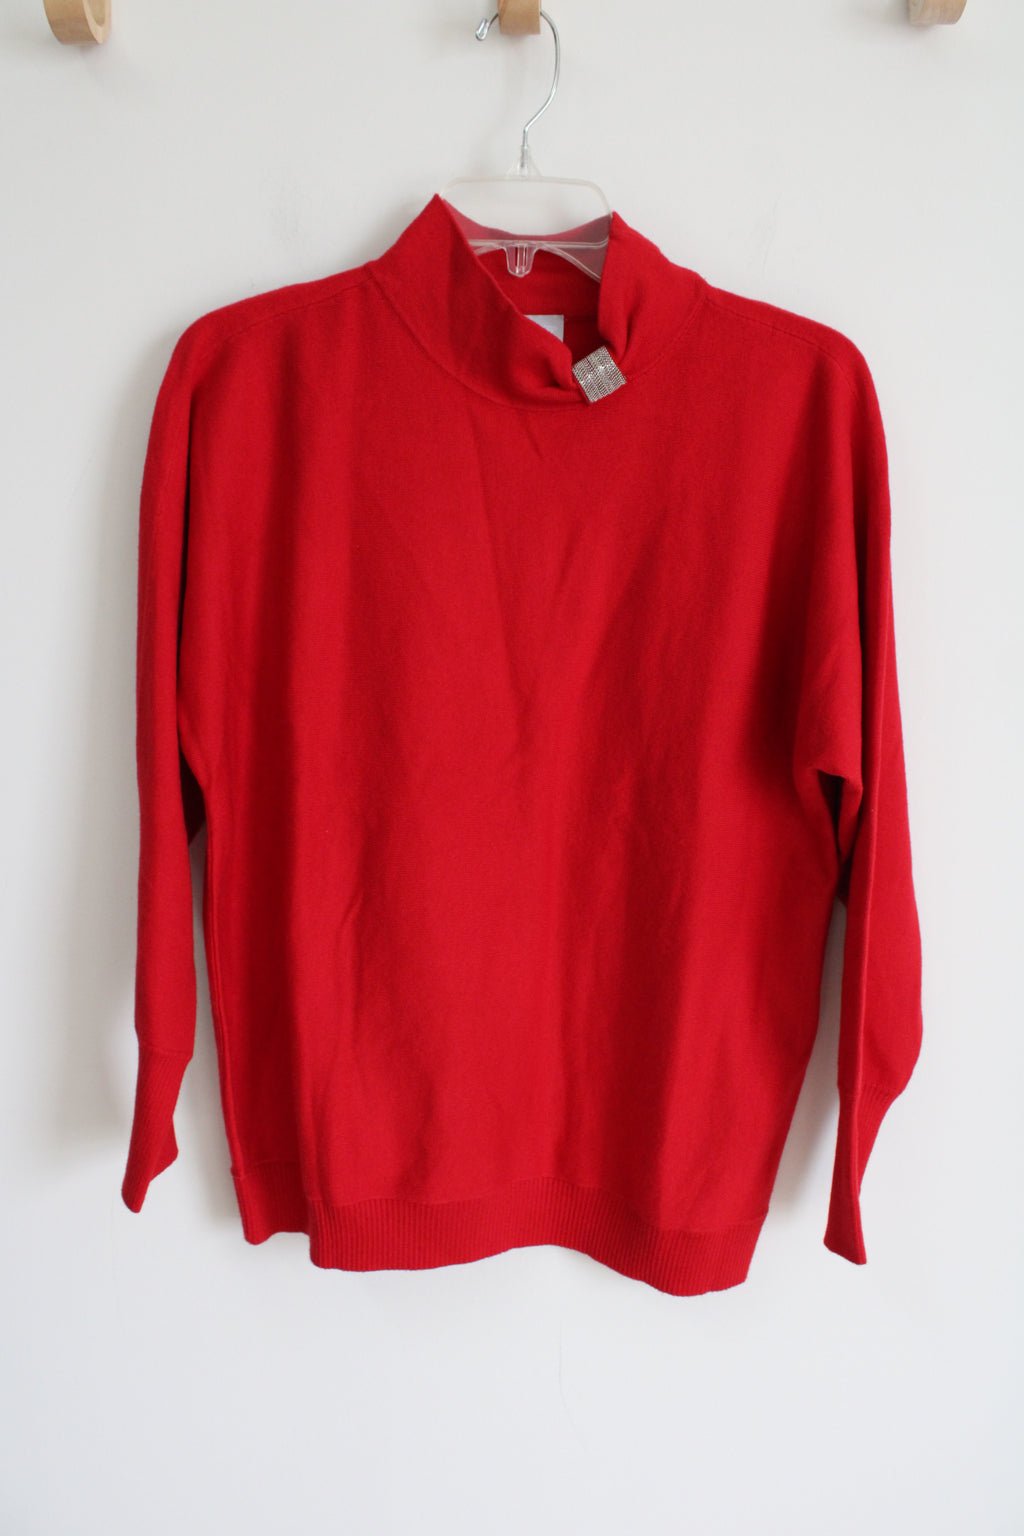 Chico's Red Knit Mock Neck Sweater | 1 (M)